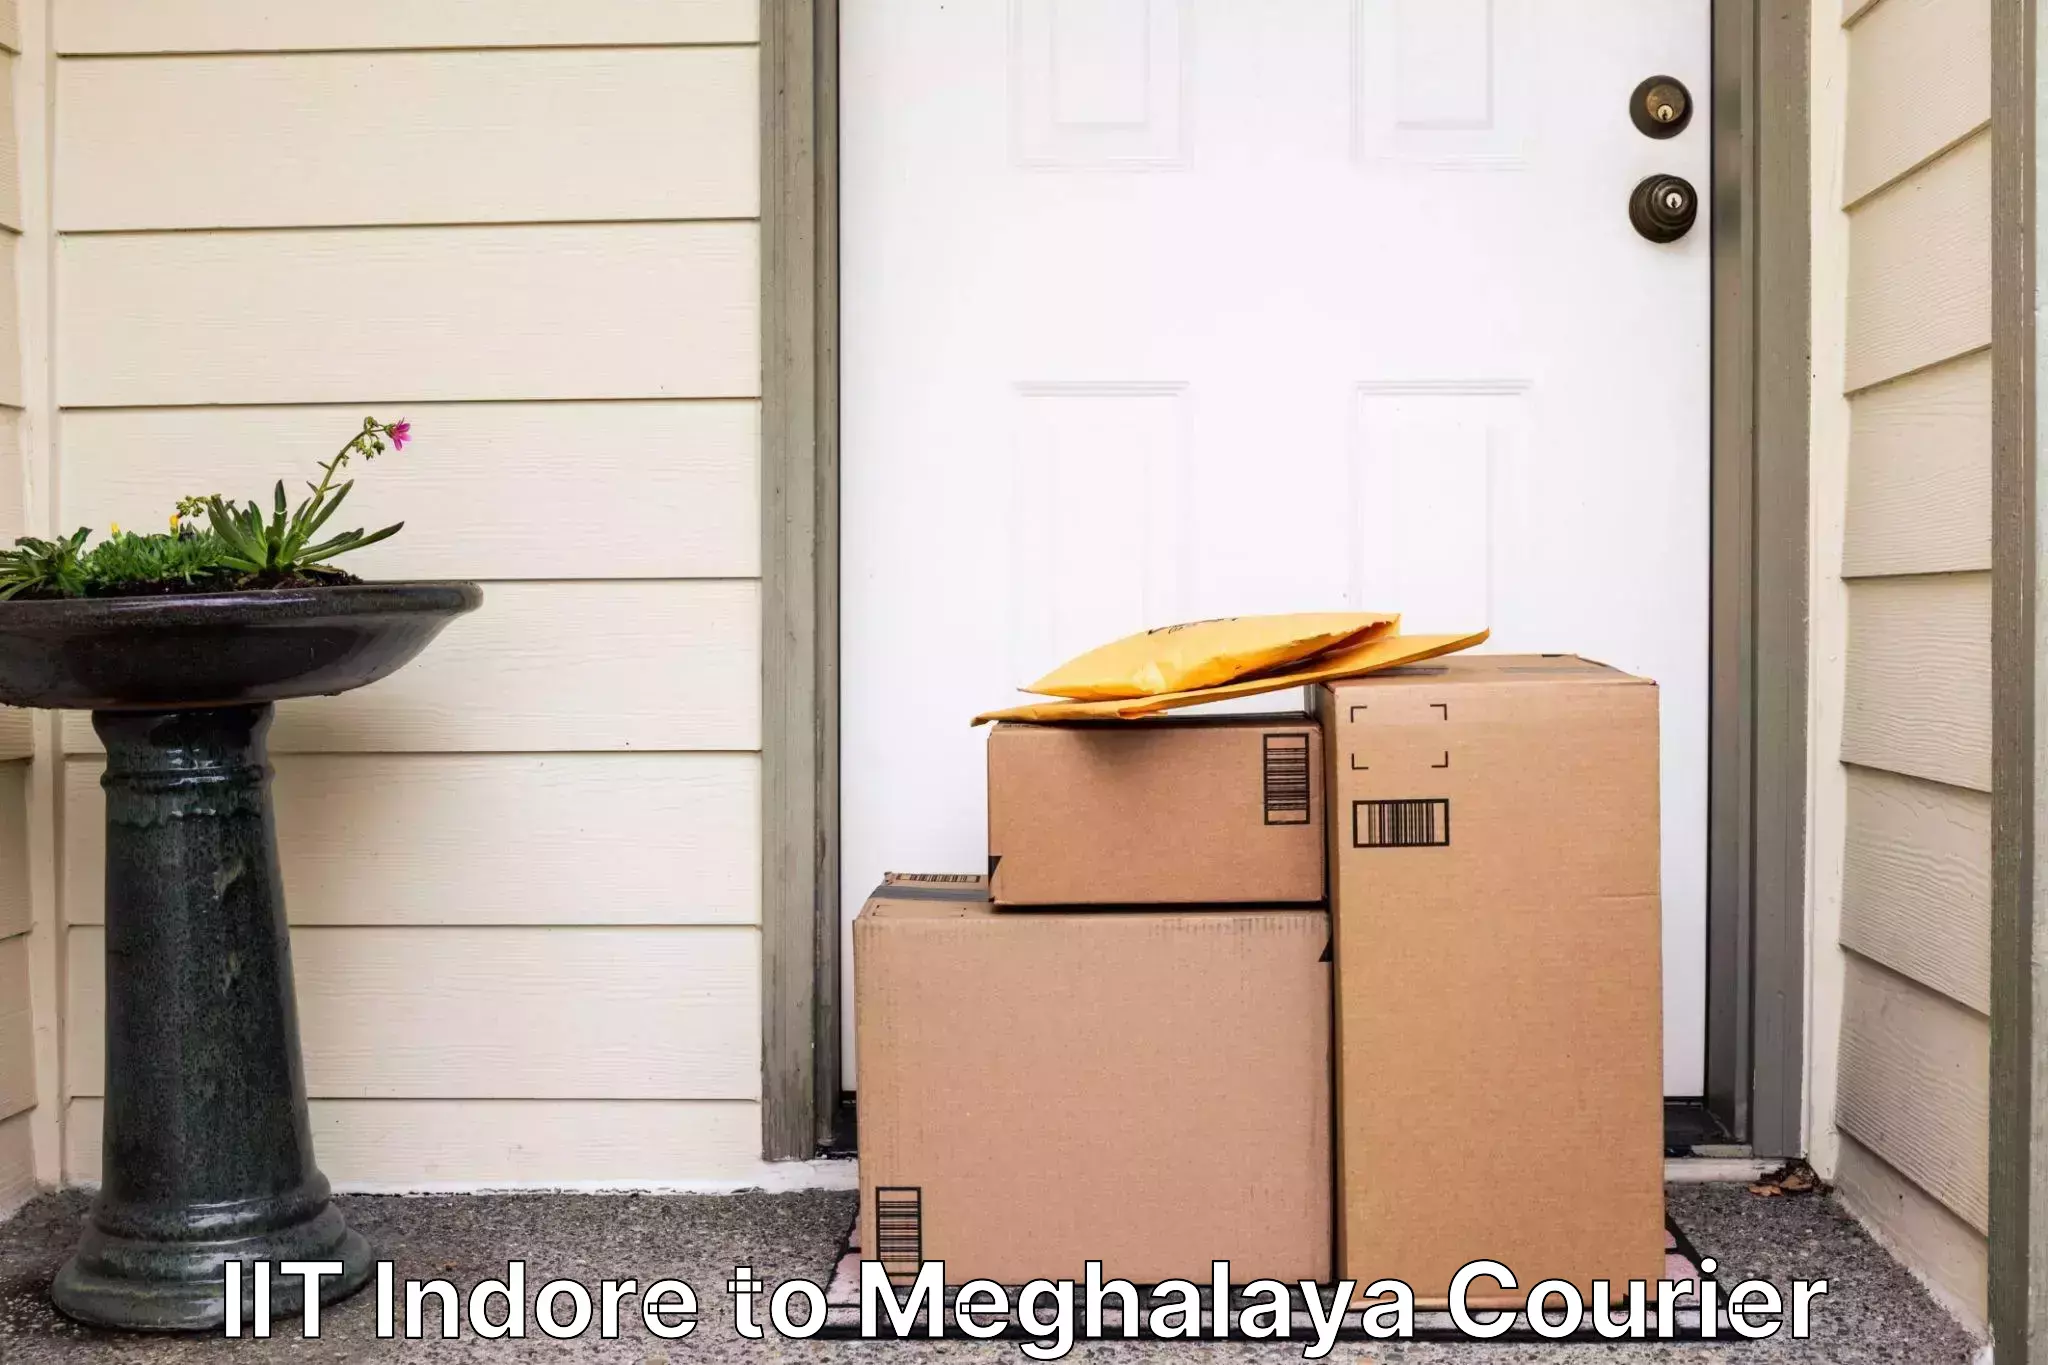 User-friendly courier app IIT Indore to Meghalaya